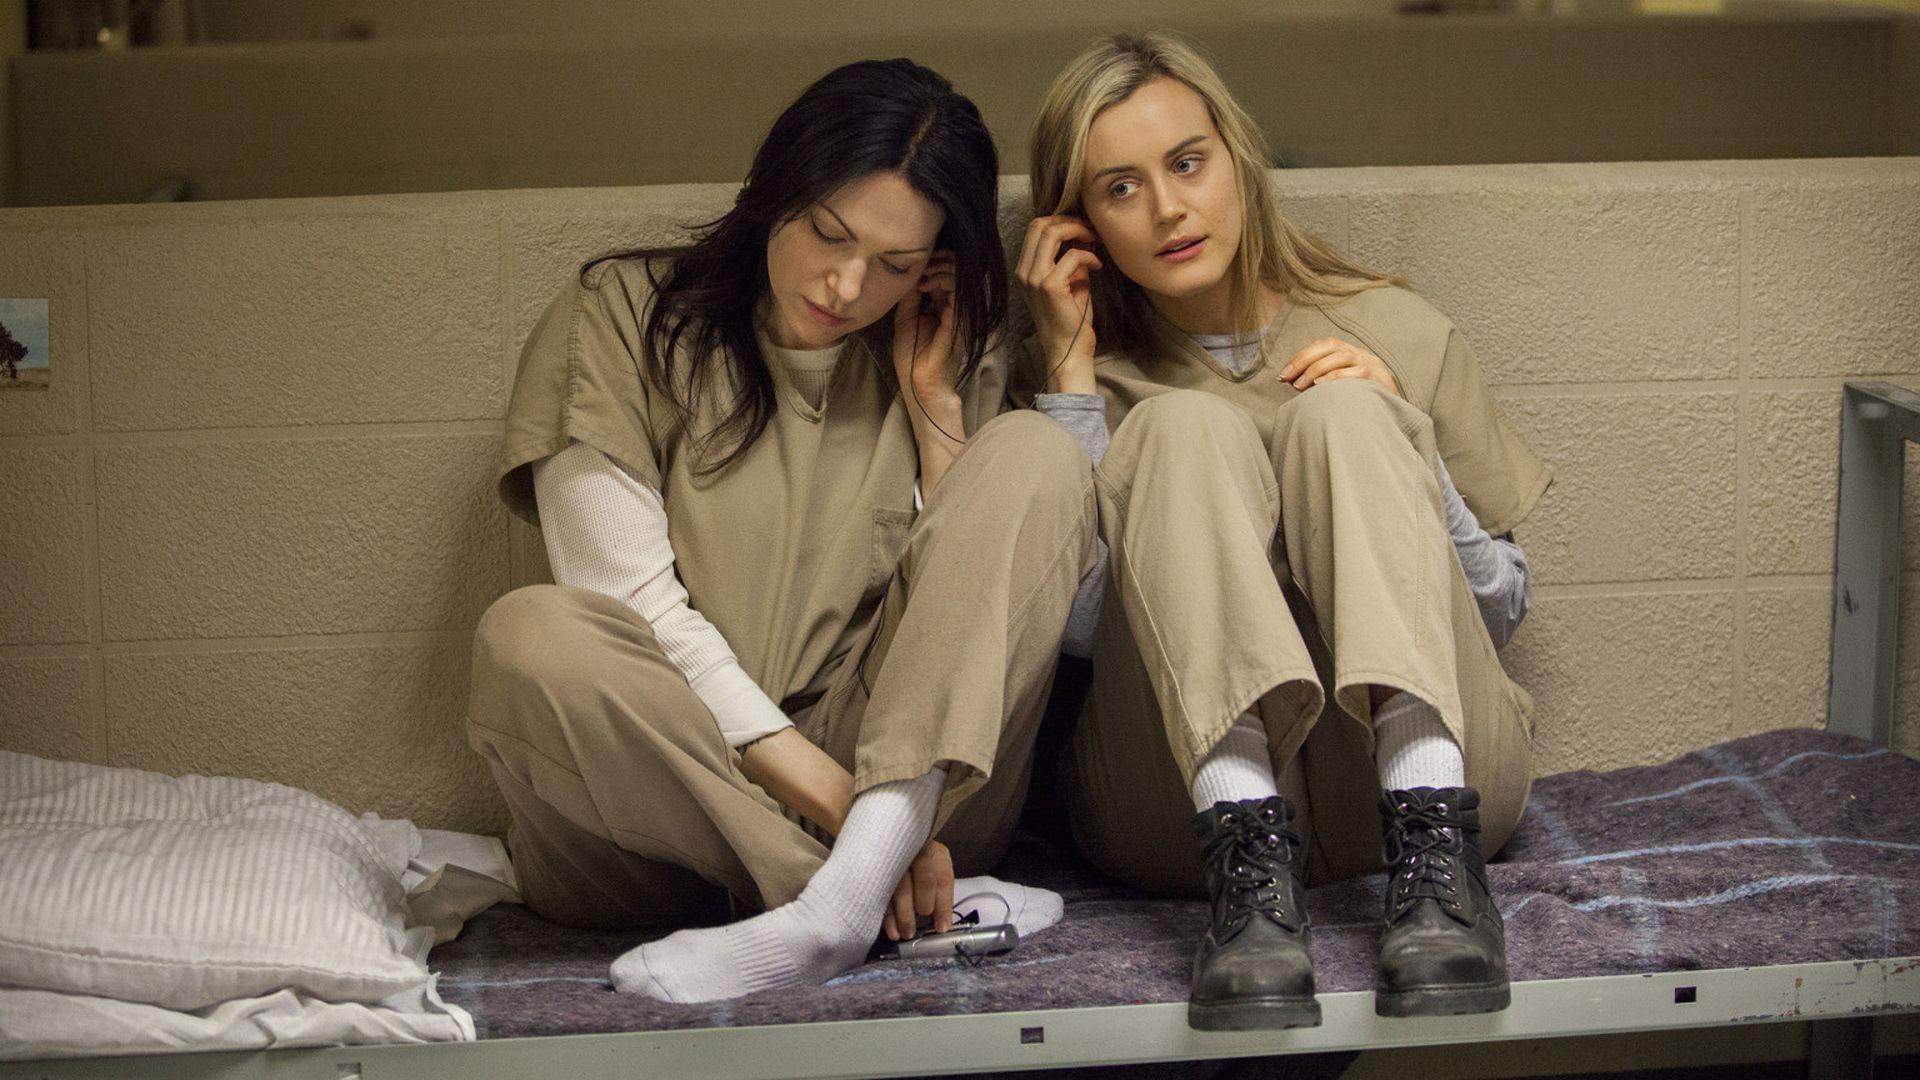 Orange Is the New Black and Piper are listening to music